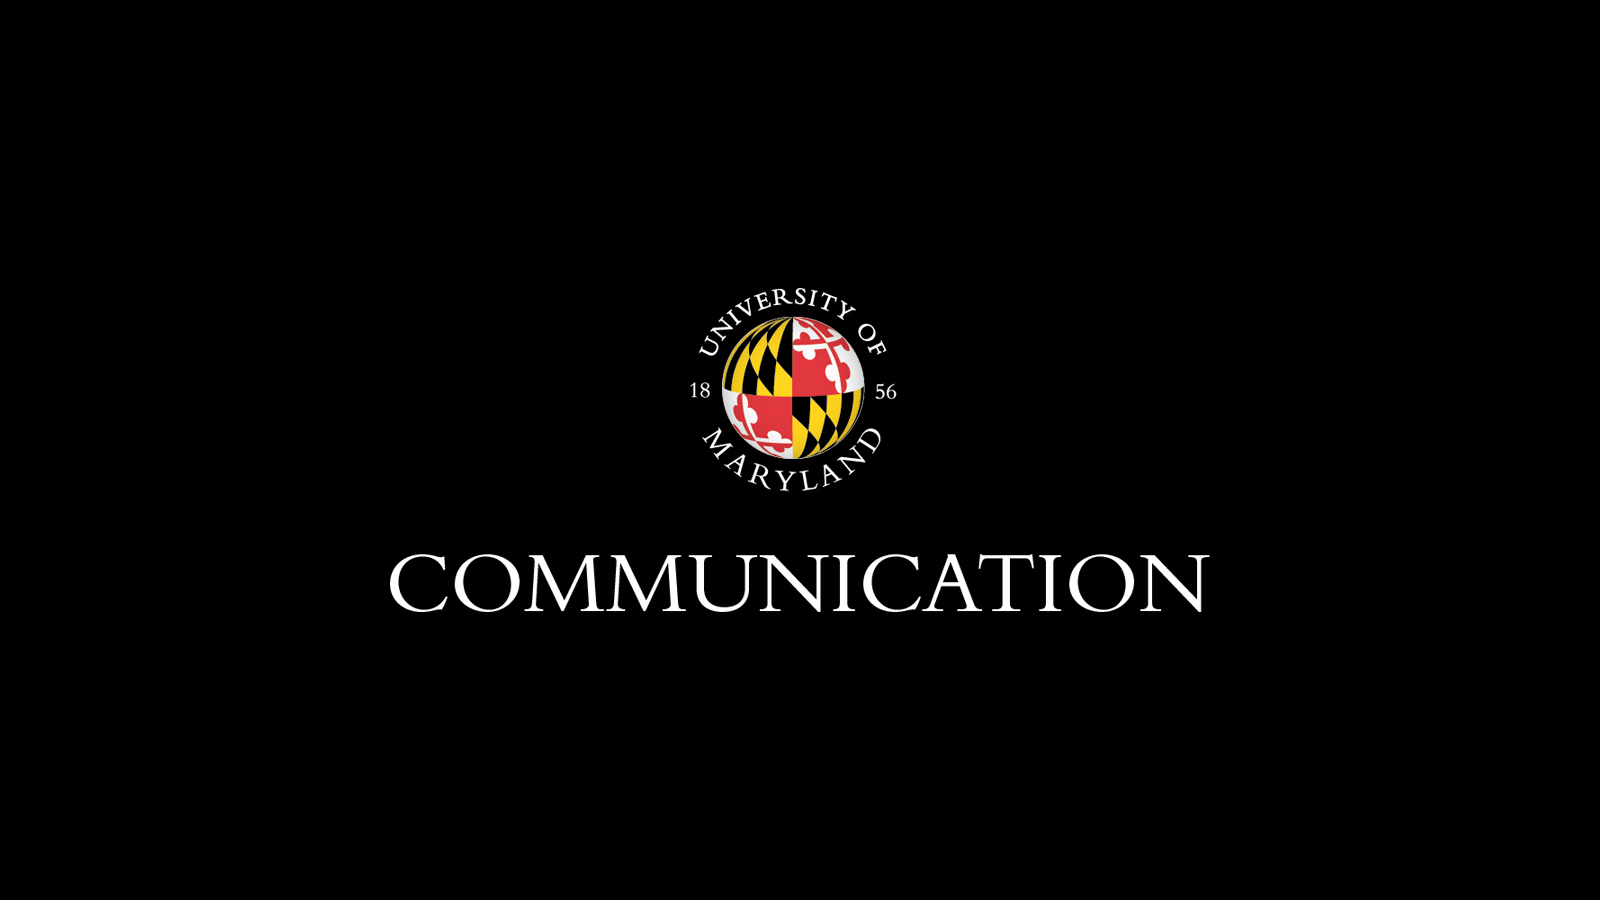 A black square with the UMD department of communication logo